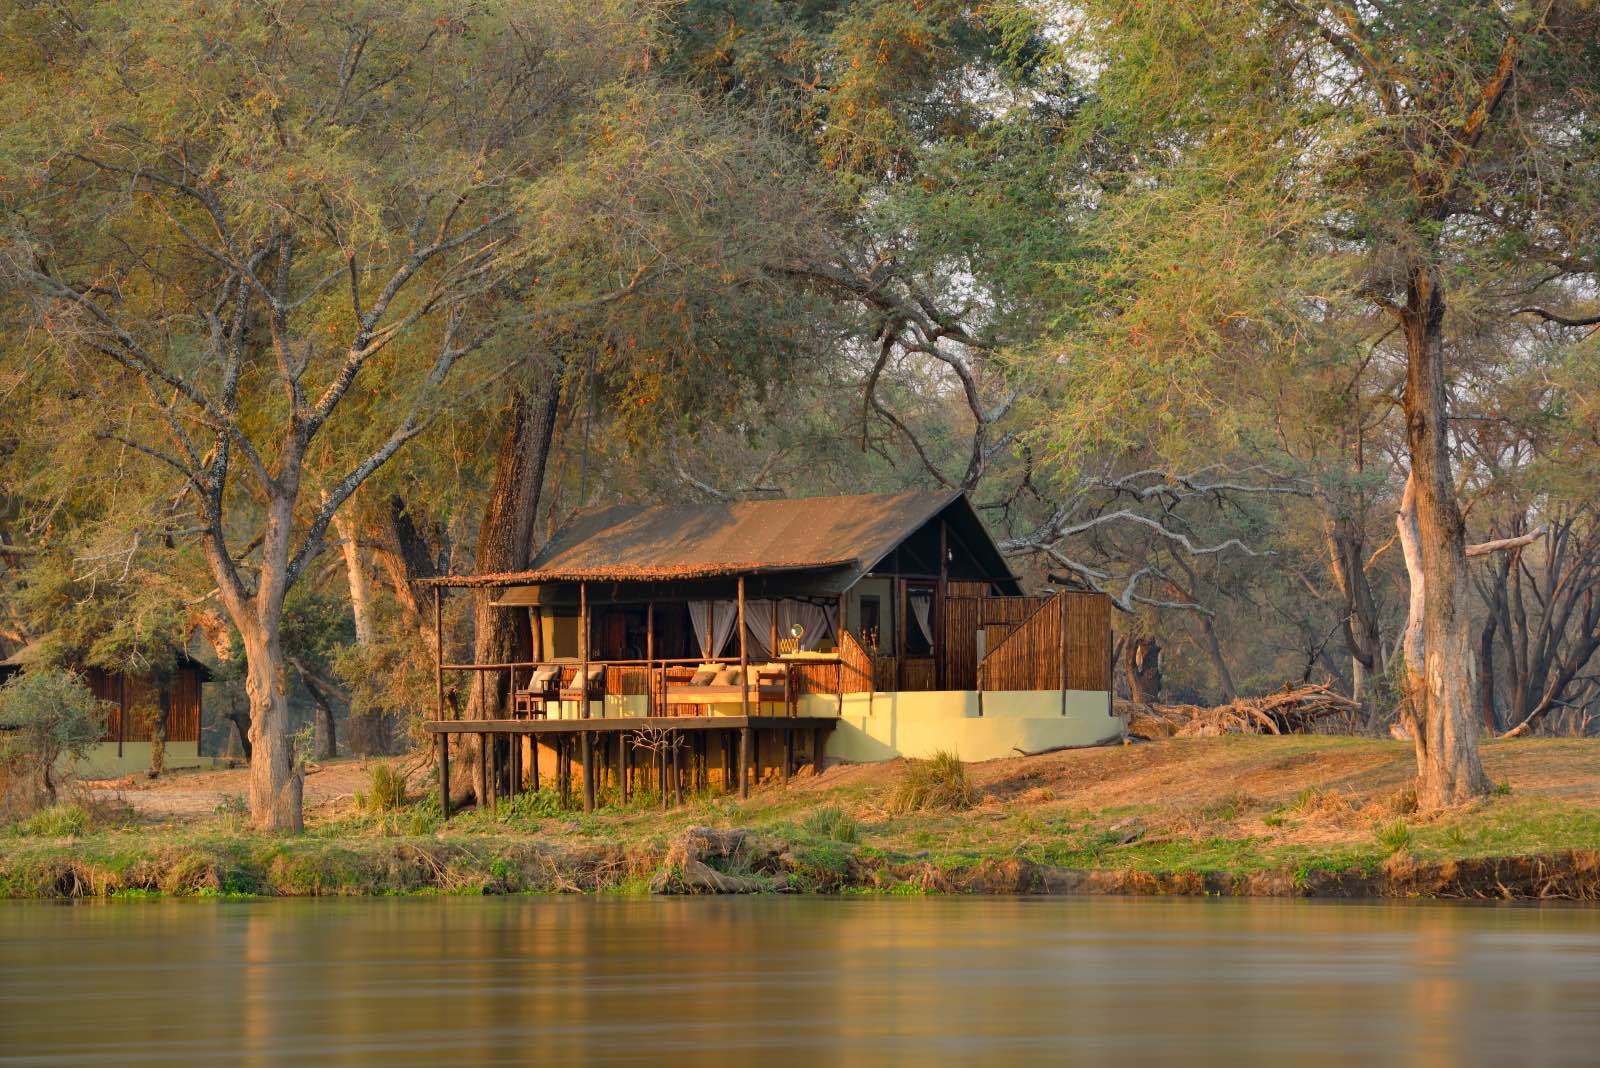 Rustic thatched chalets on the banks of the river at Old Mondoro